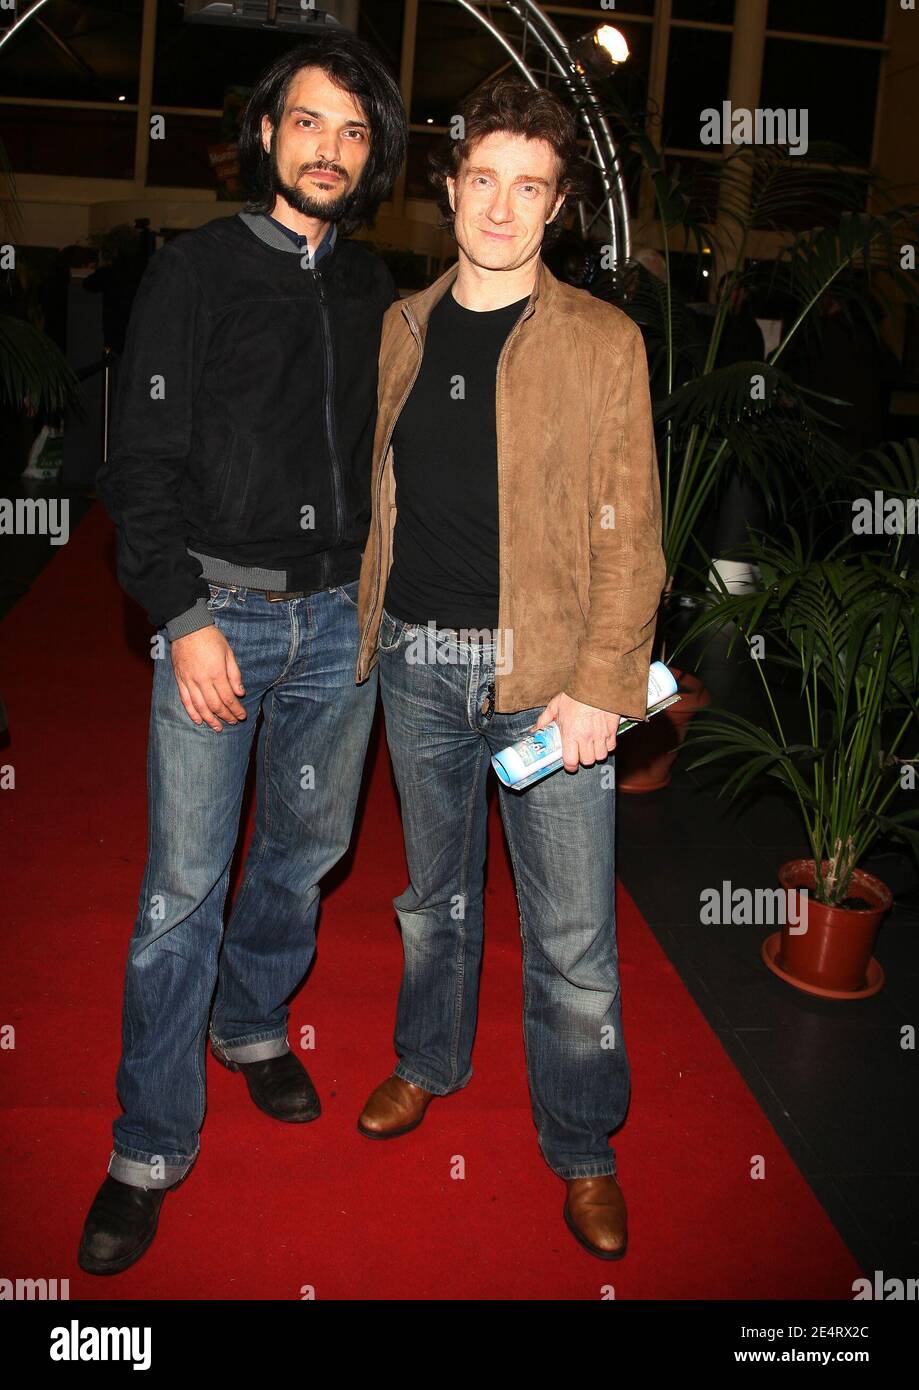 Actors Vincent Martinez and Thierry Fremont attend the opening night ceremony of the 19th Valenciennes adventures film festival in Valenciennes, France on March 28, 2008. Photo by Denis Guignebourg/ABACAPRESS.COM Stock Photo